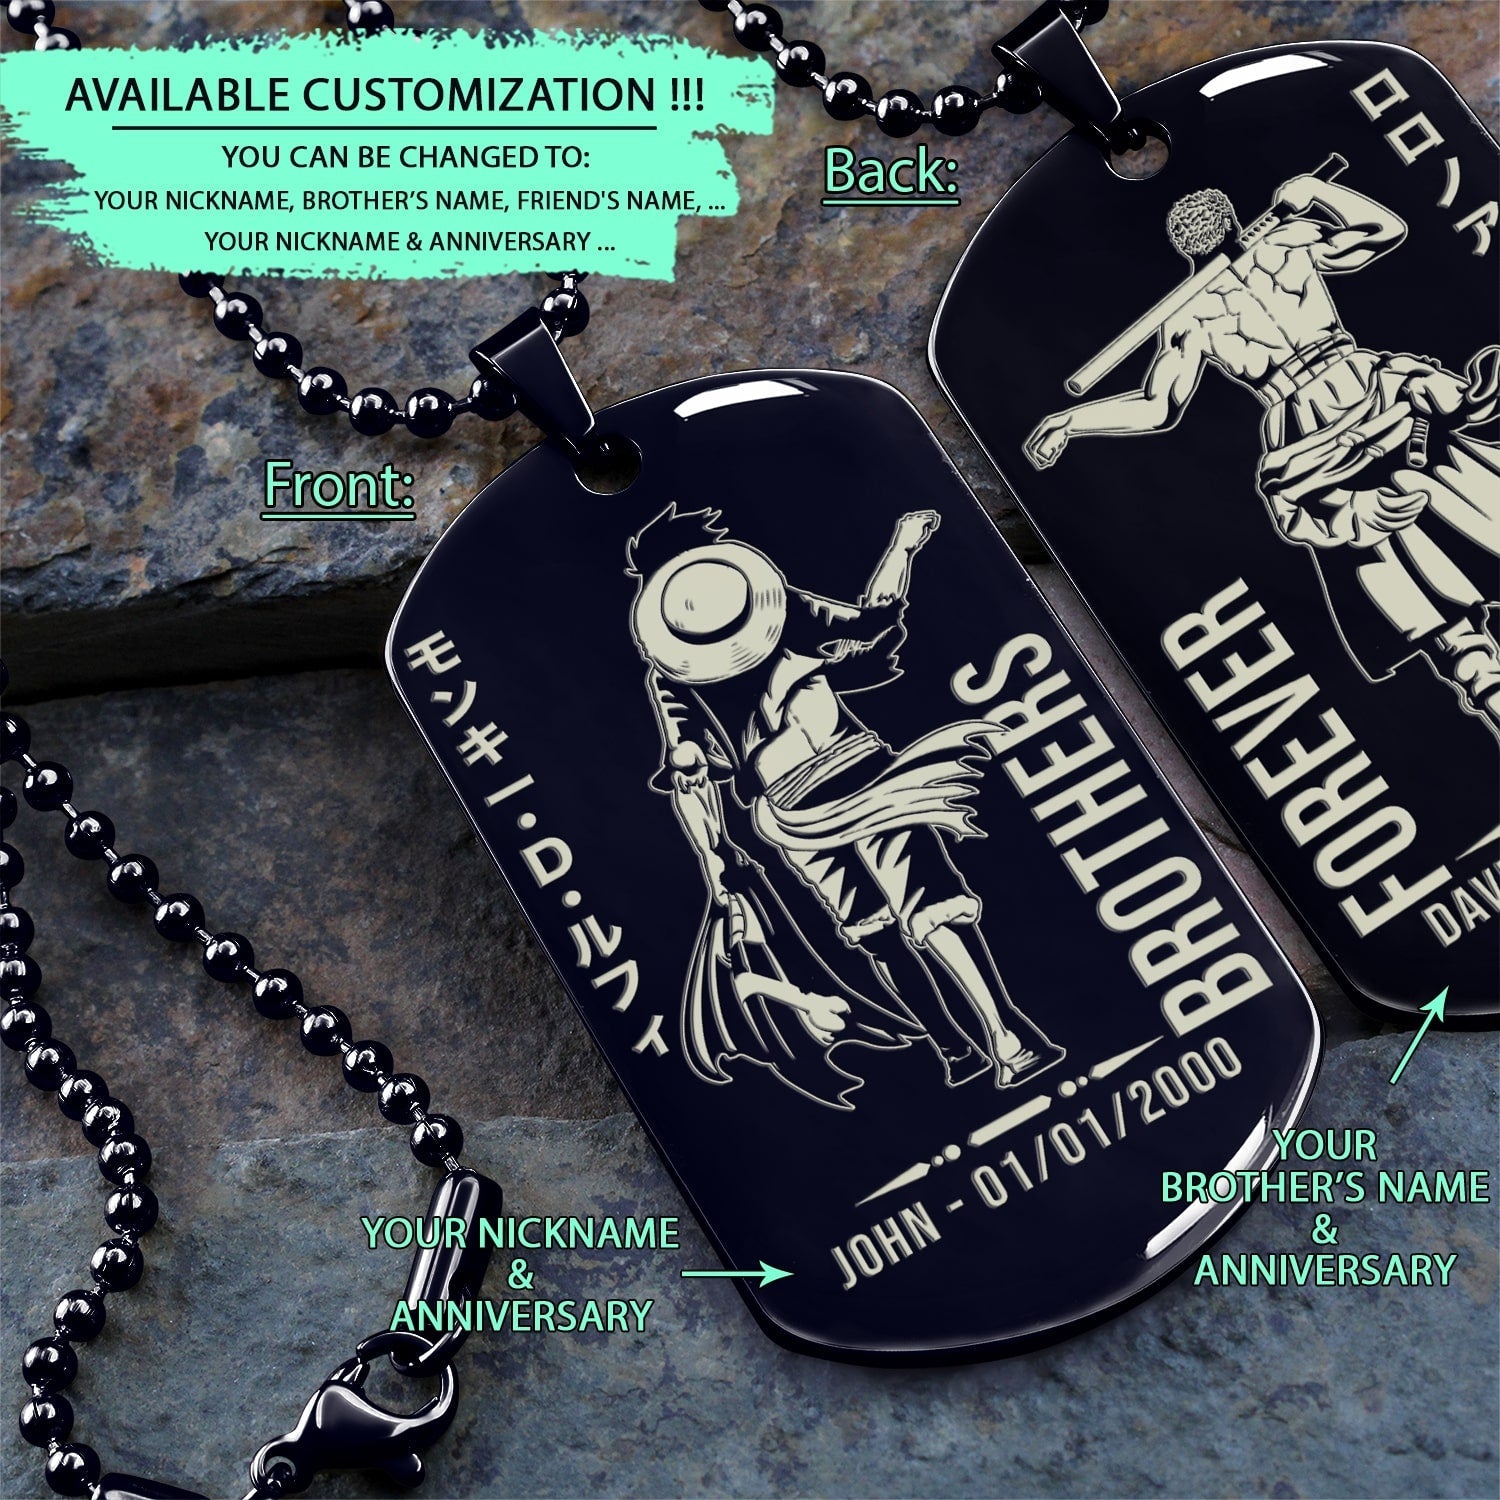 OPD031 - Brothers Forever - Monkey D. Luffy - Roronoa Zoro - One Piece Dog Tag - Double Sided Engrave Black Dog Tag